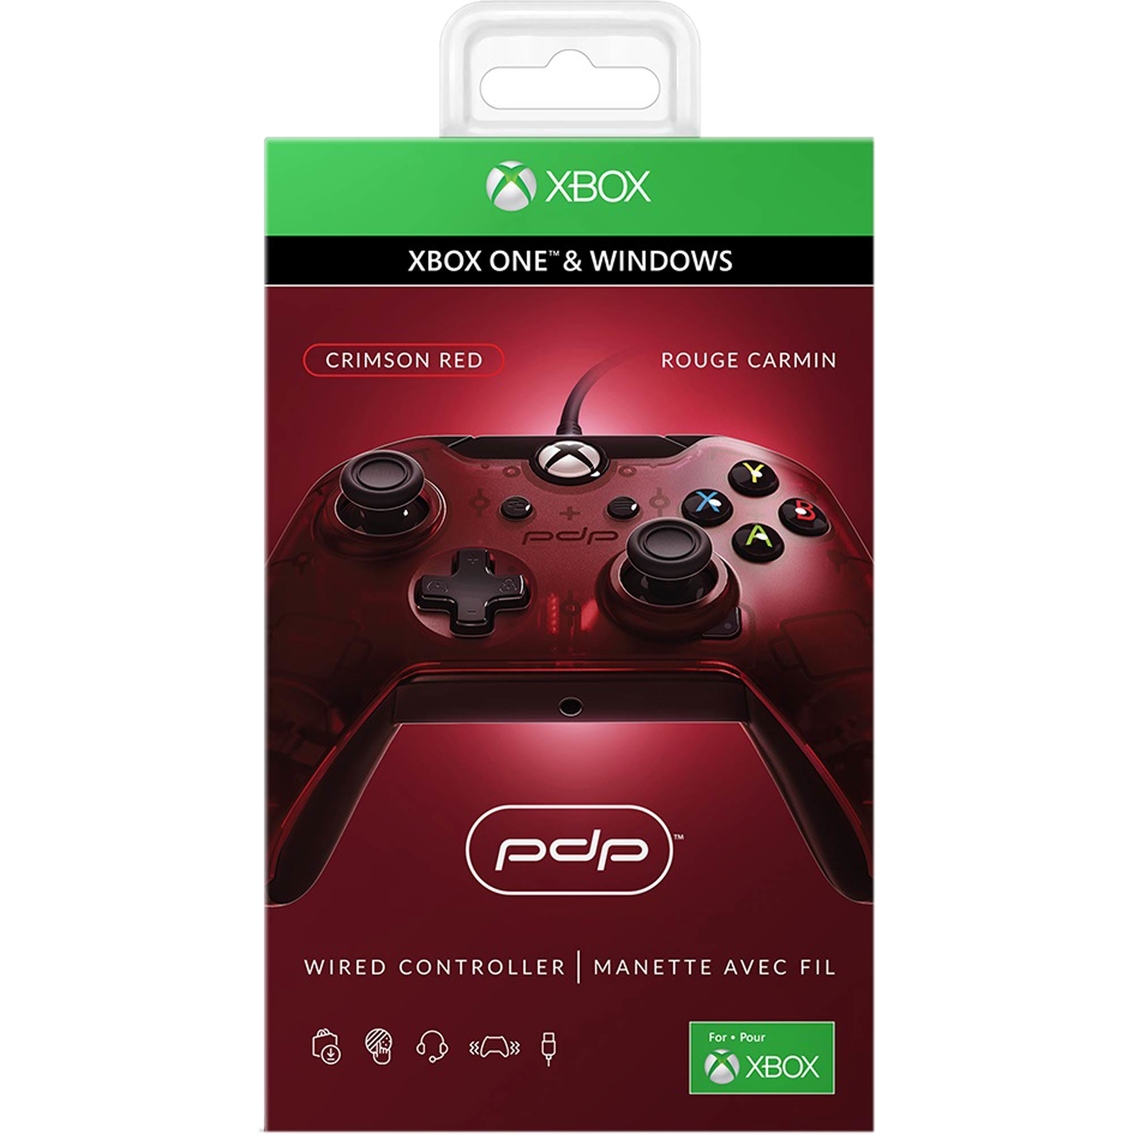 PDP Xbox One Wired Crimson Red Controller - Image 2 of 2